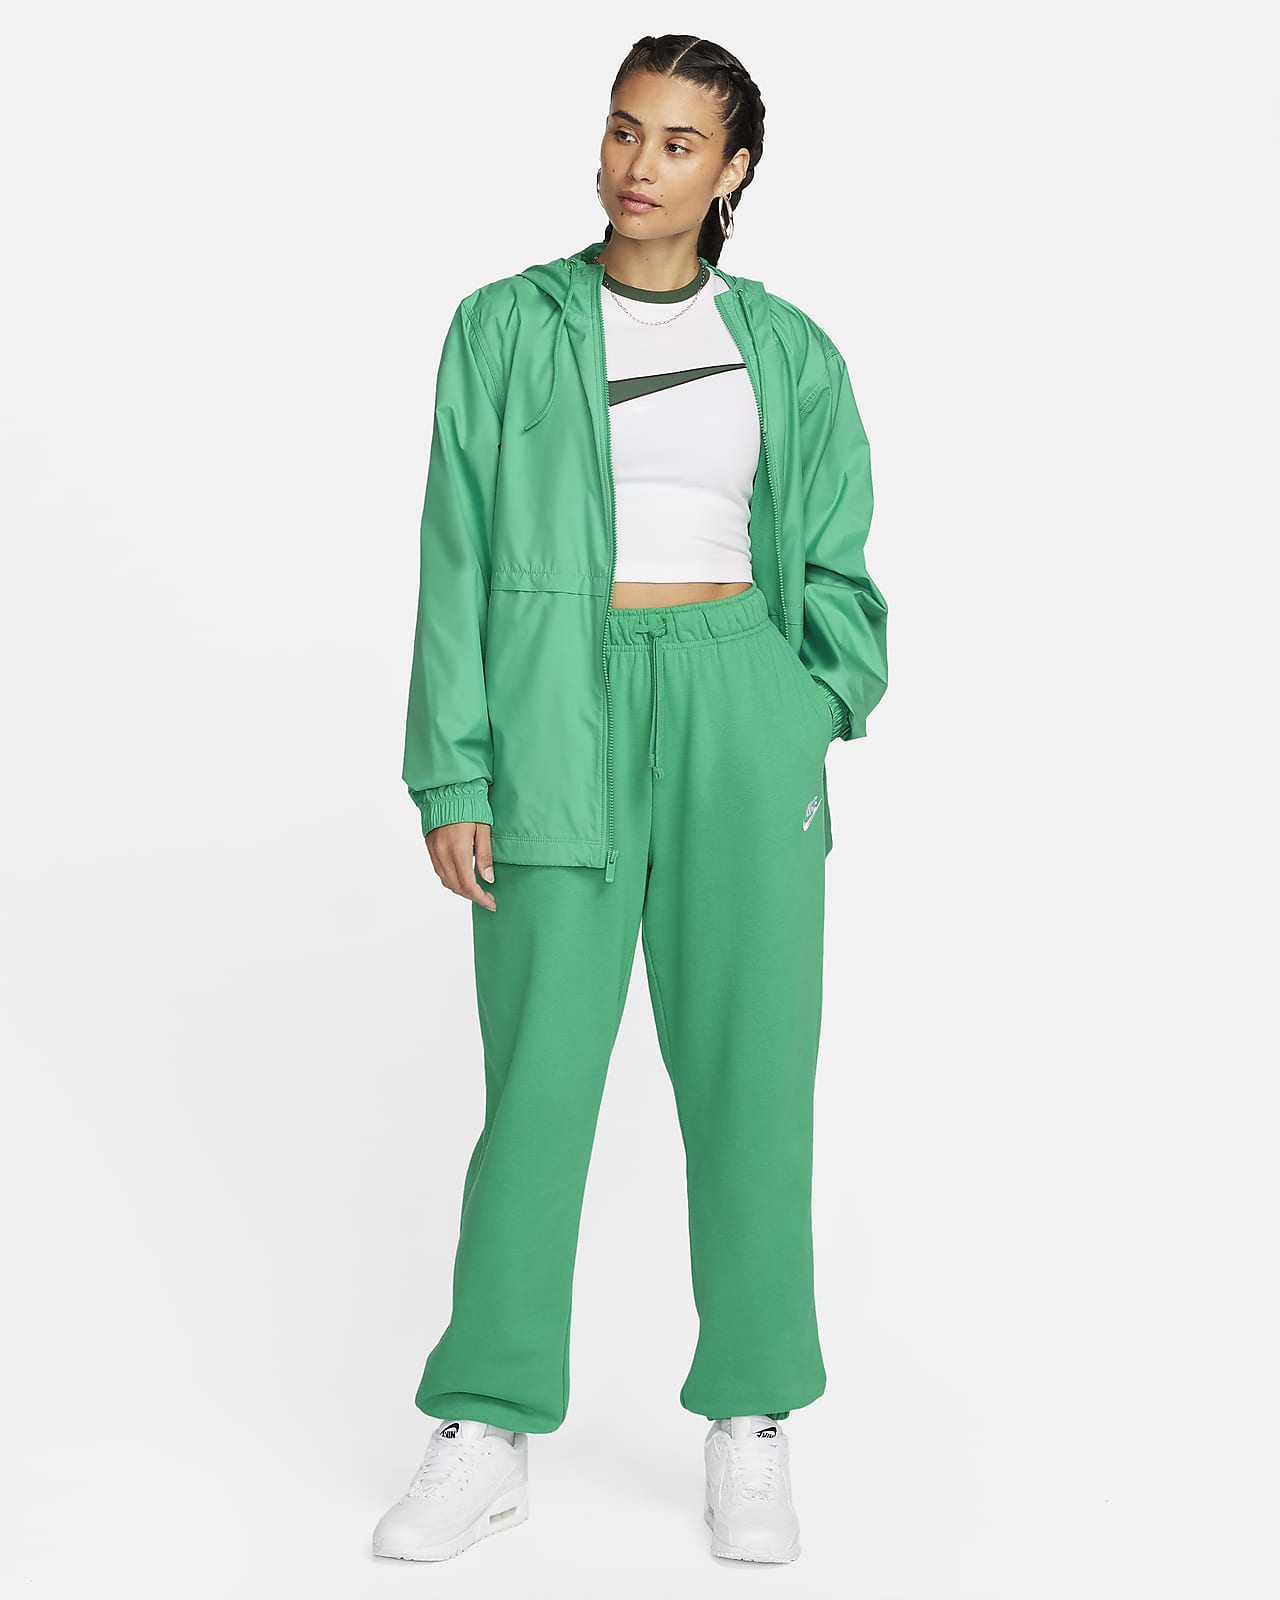 https://static.nike.com/a/images/t_PDP_1280_v1/f_auto,q_auto:eco/3a931400-f4aa-4116-a8ef-285ff877ae14/sportswear-essential-repel-womens-woven-jacket-MNH41C.png